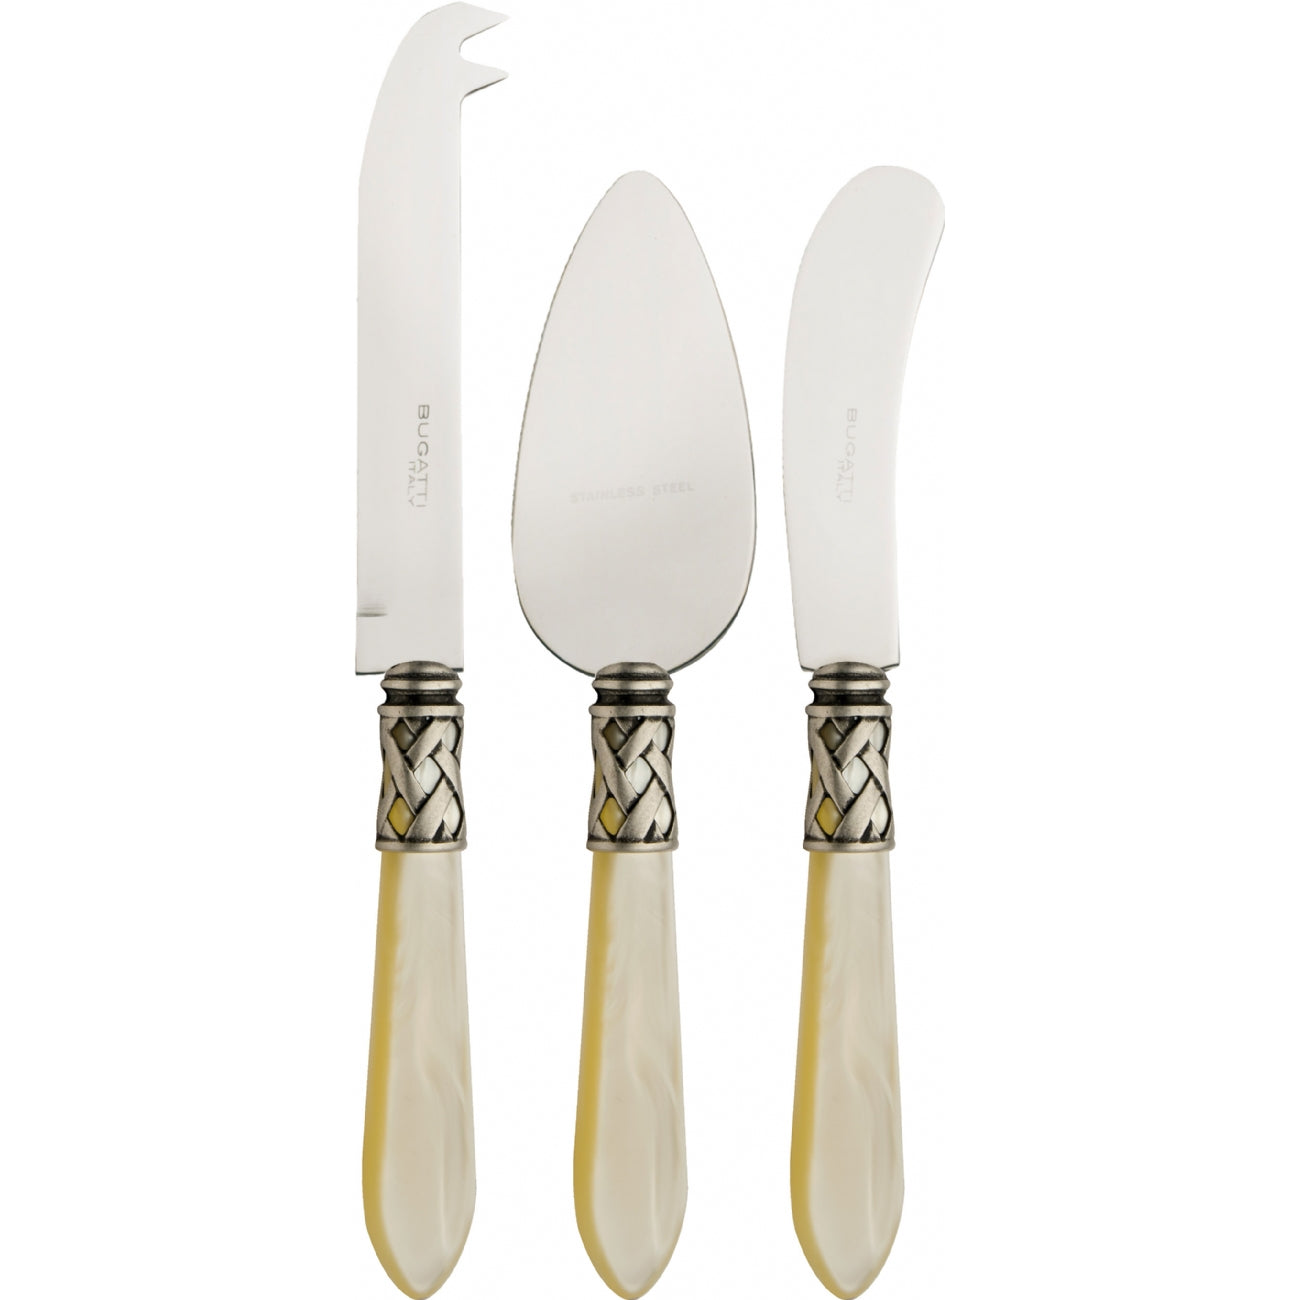 BUGATTI, Aladdin, Set of 3 cheese pieces in 18/10 Stainless Steel, silver ferrule and Ivory color handle with mother of pearl effect